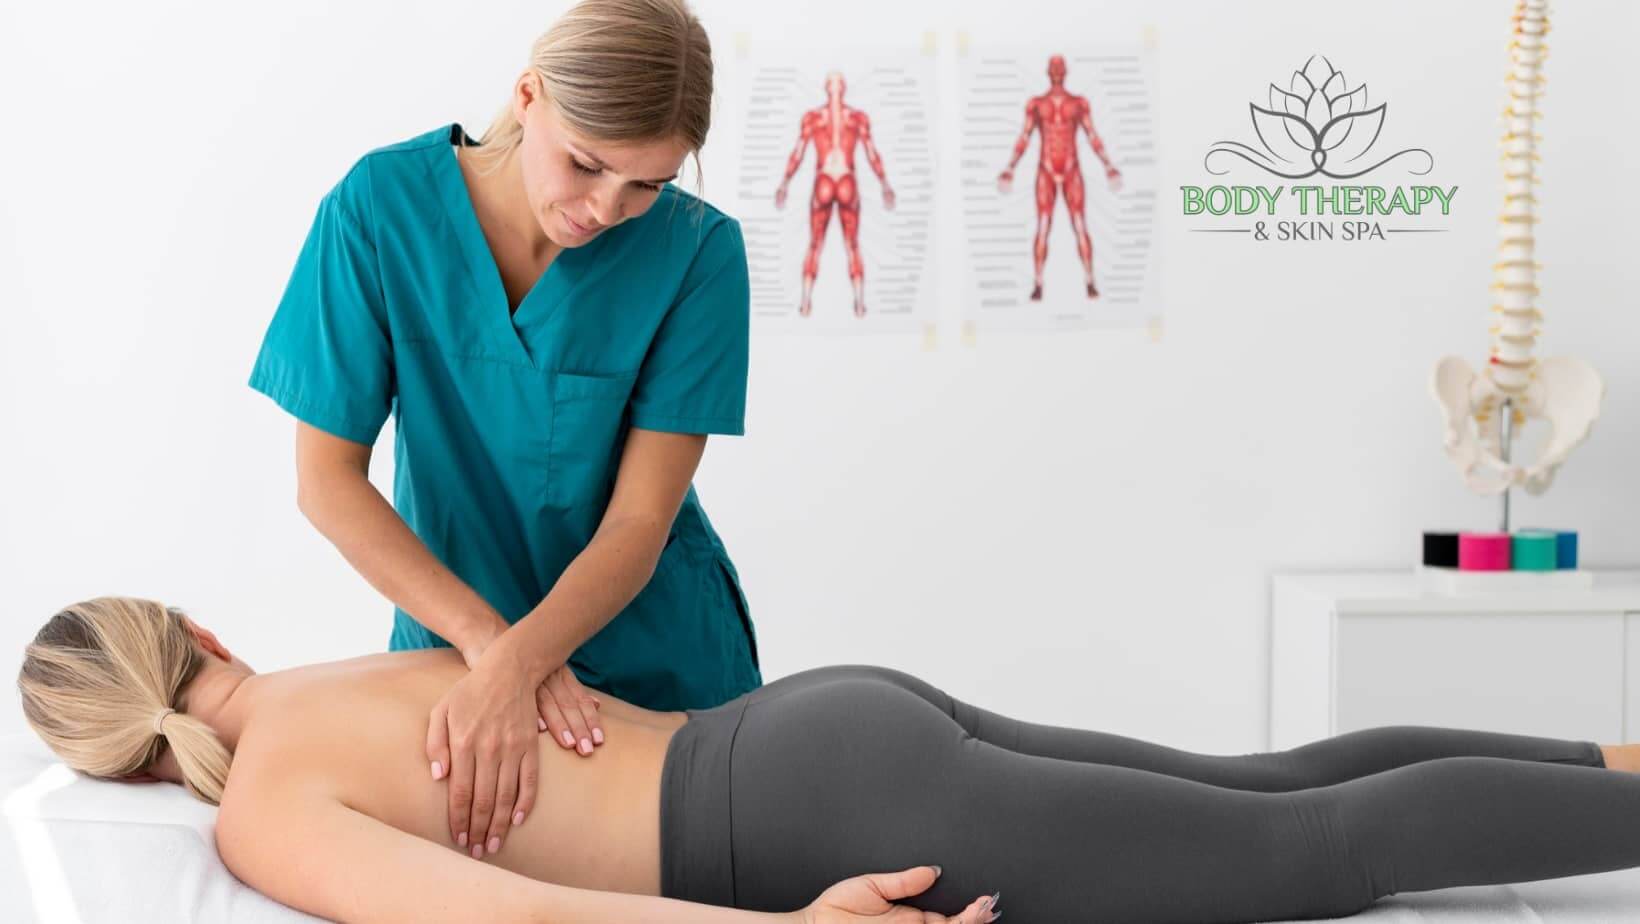 Experience Unparalleled Body Therapy in St. Petersburg